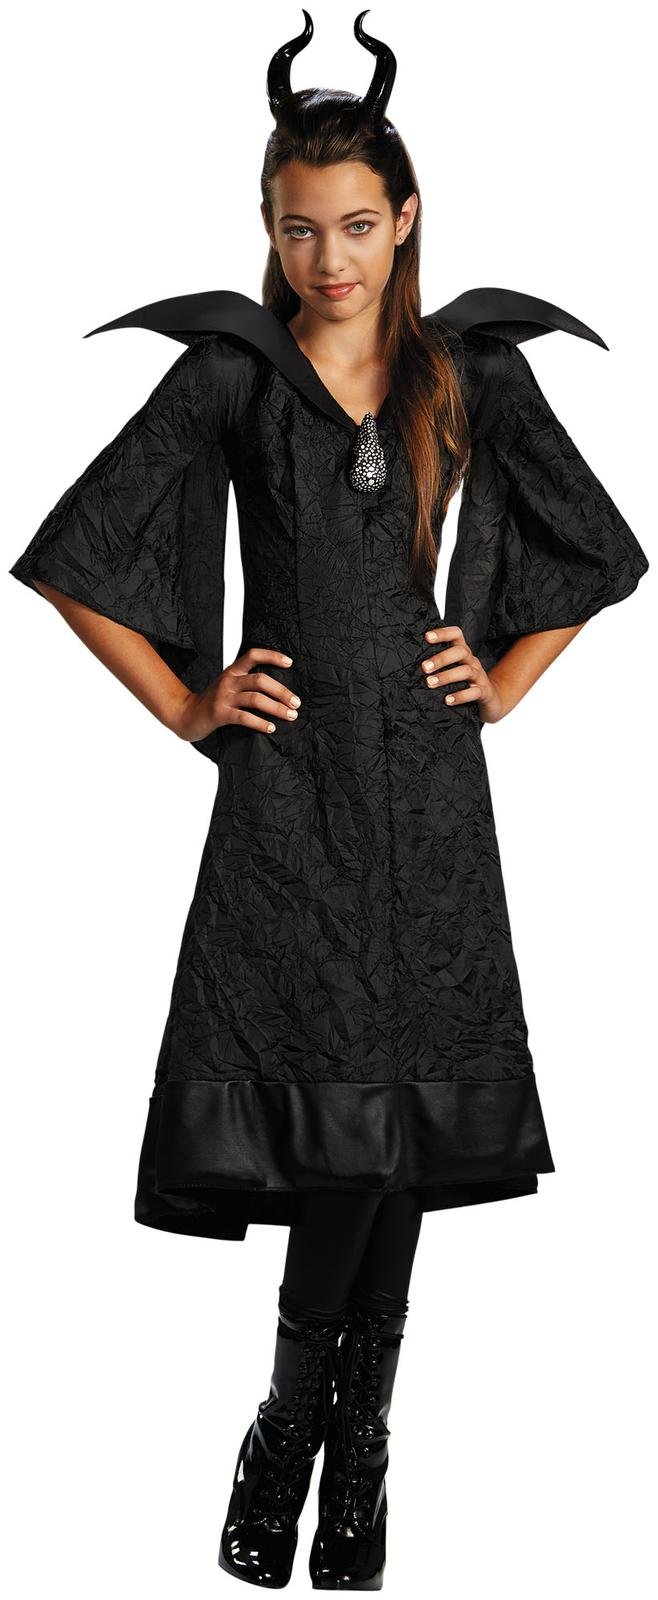 Maleficent Christening Black Gown Child Classic Costume - Click Image to Close